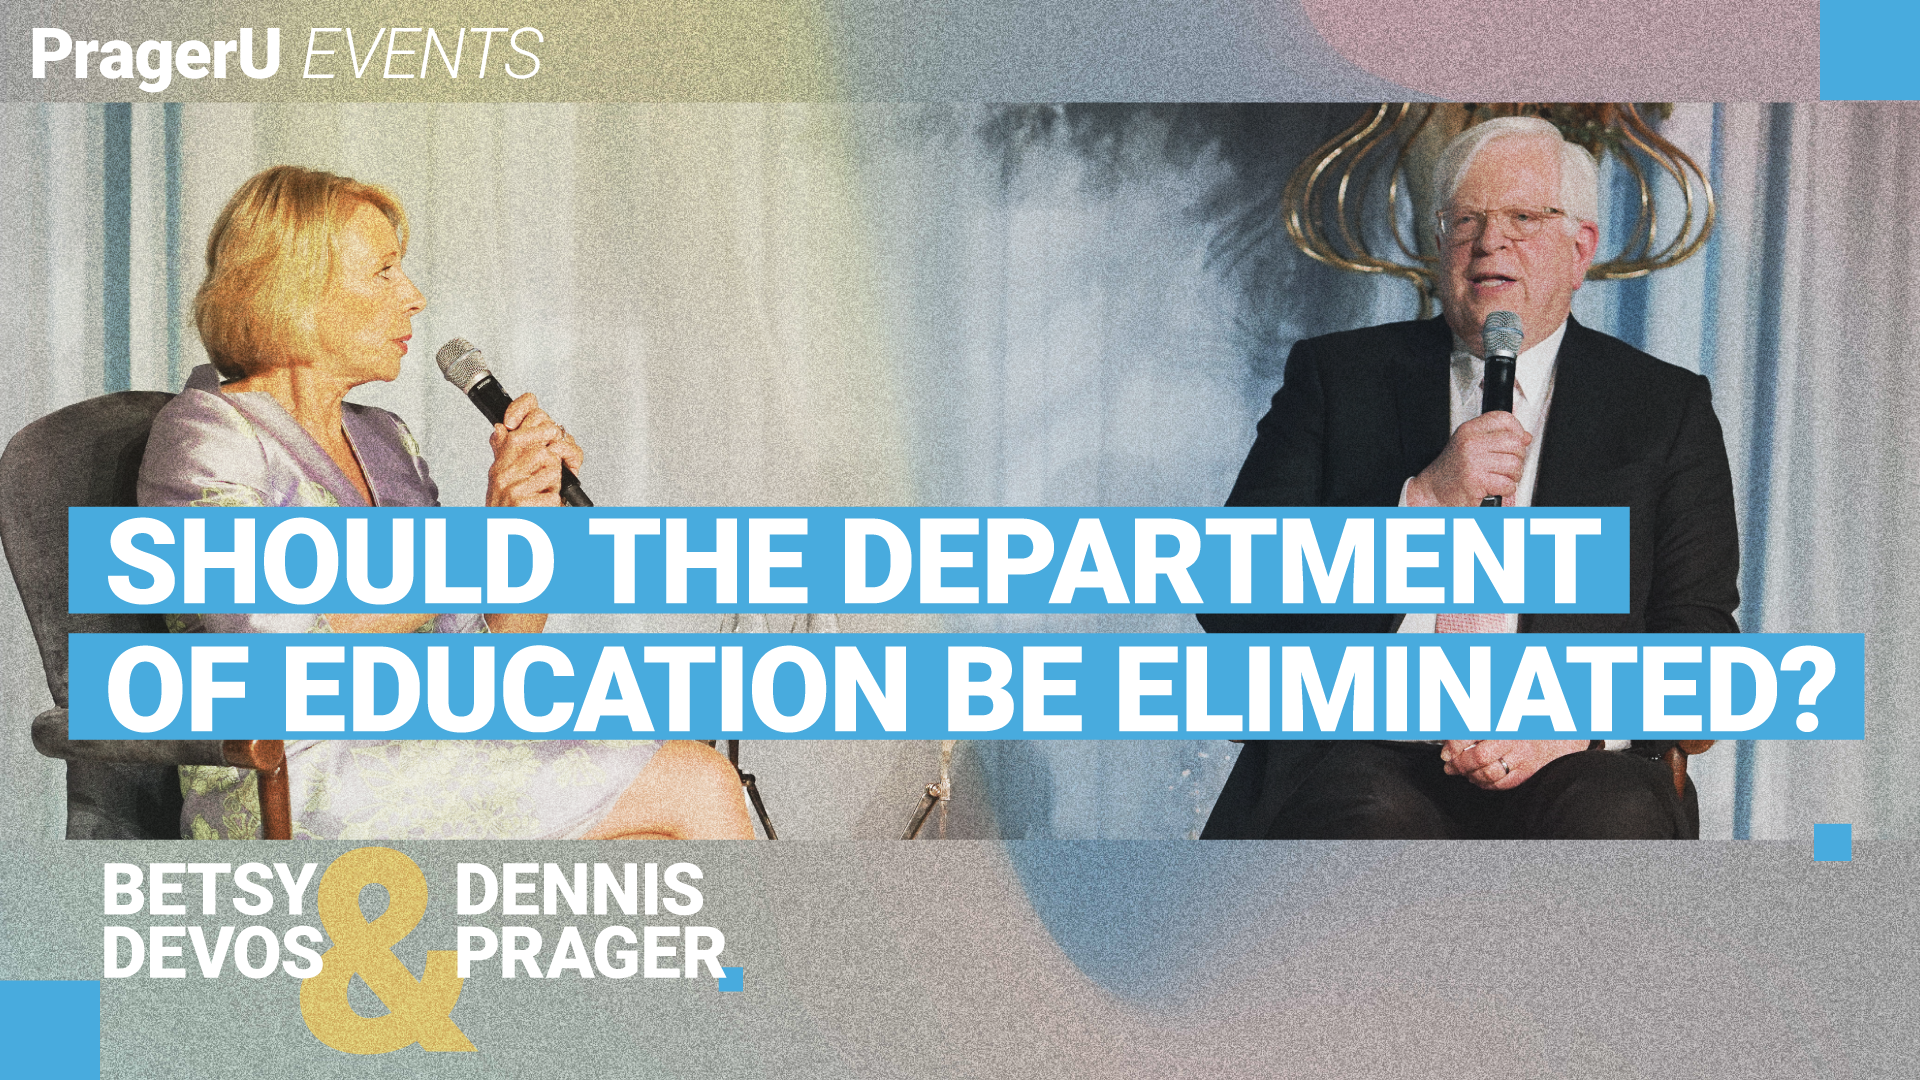 Should the Department of Education Be Eliminated?